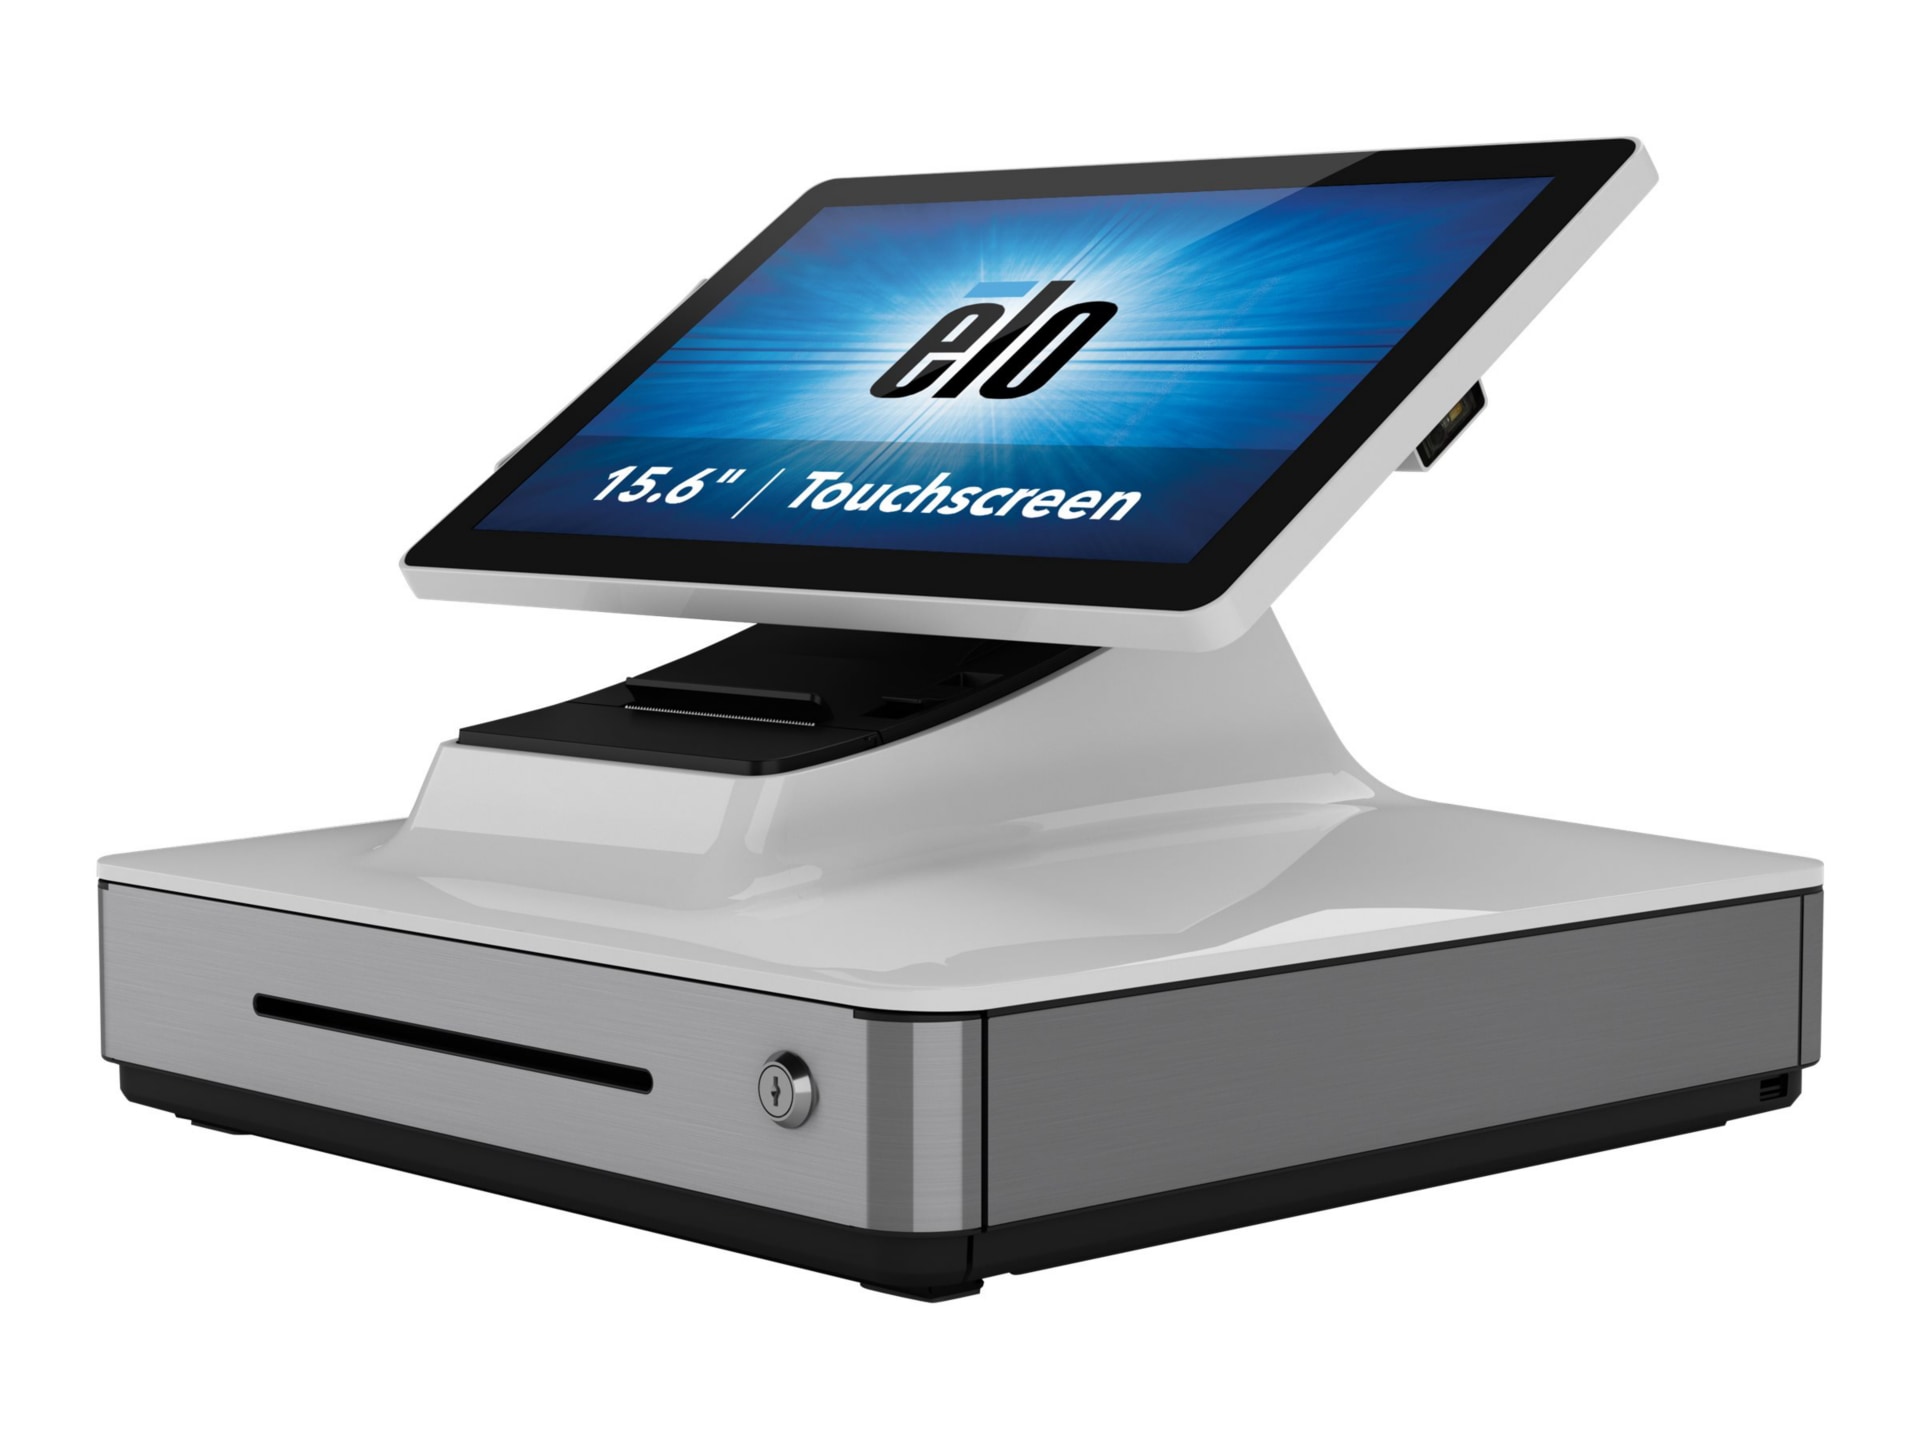 Elo PayPoint Plus - all-in-one - Snapdragon 2 GHz - 3 GB - SSD 32 GB - LED